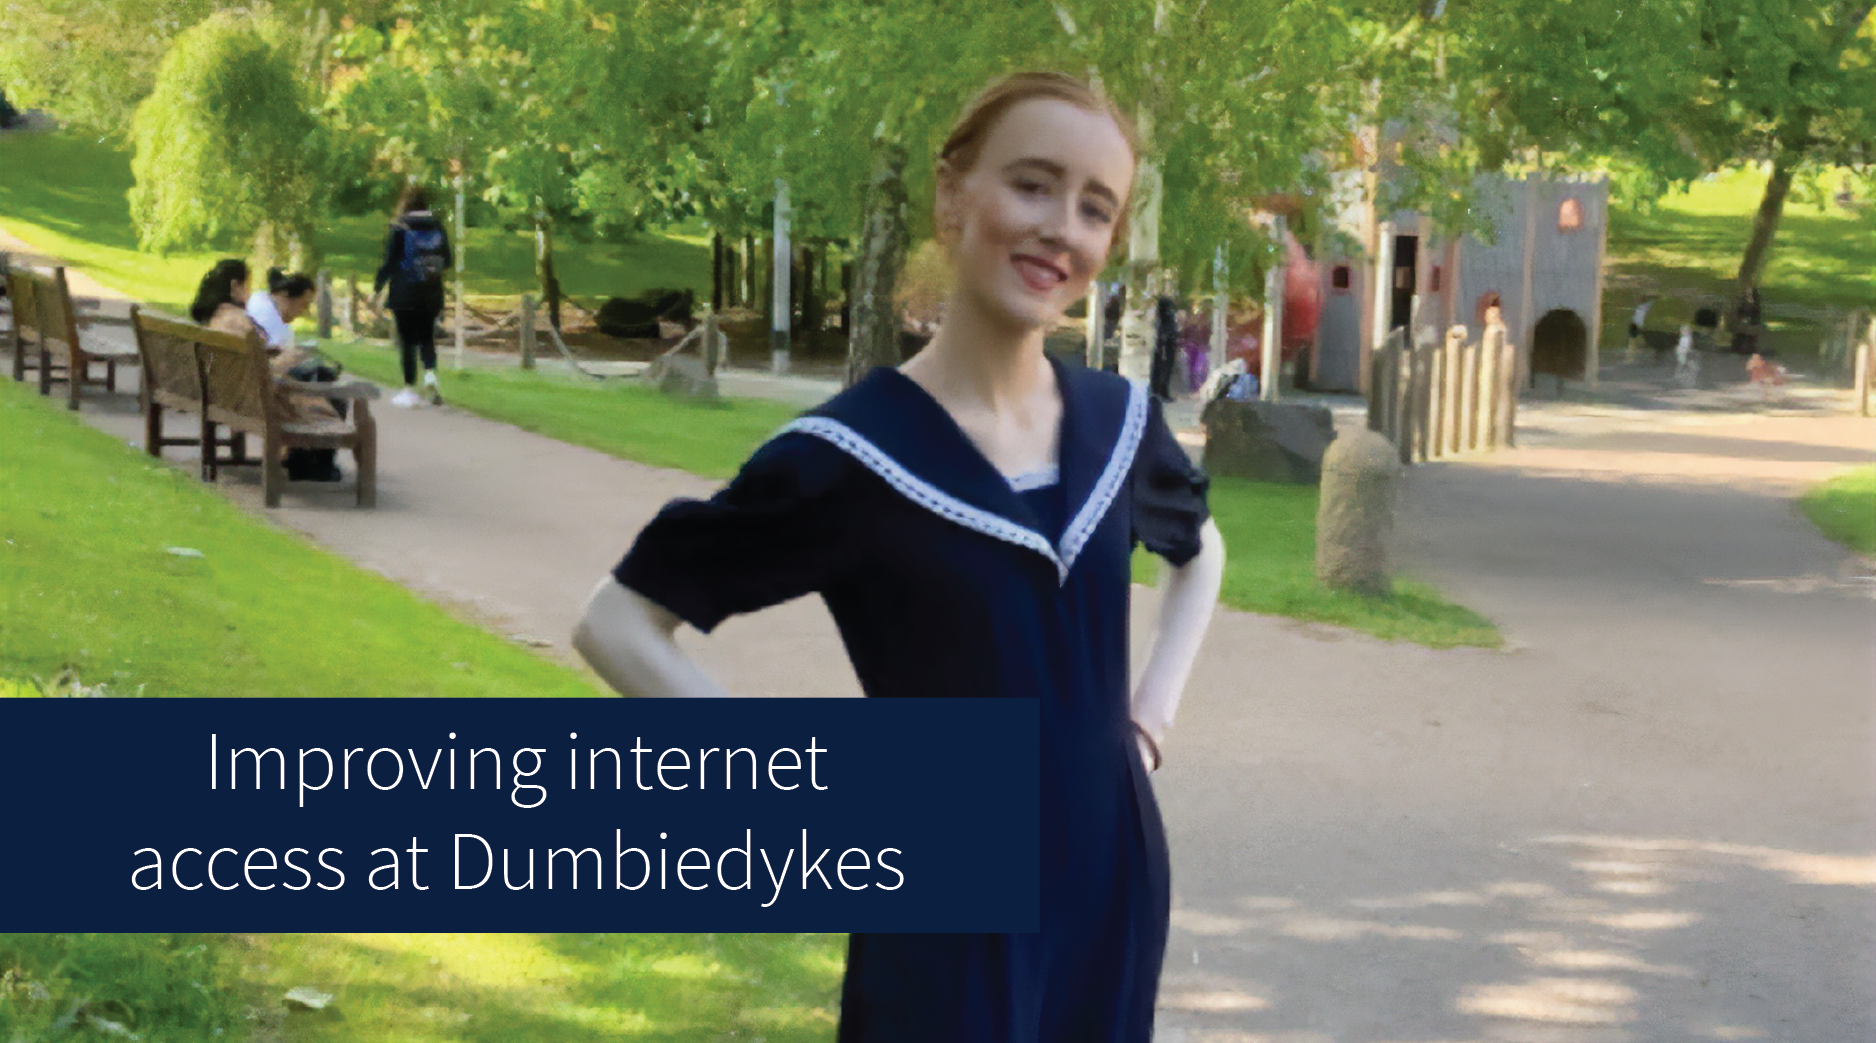 Iona Barrie "Improving internet access at Dumbiedykes"